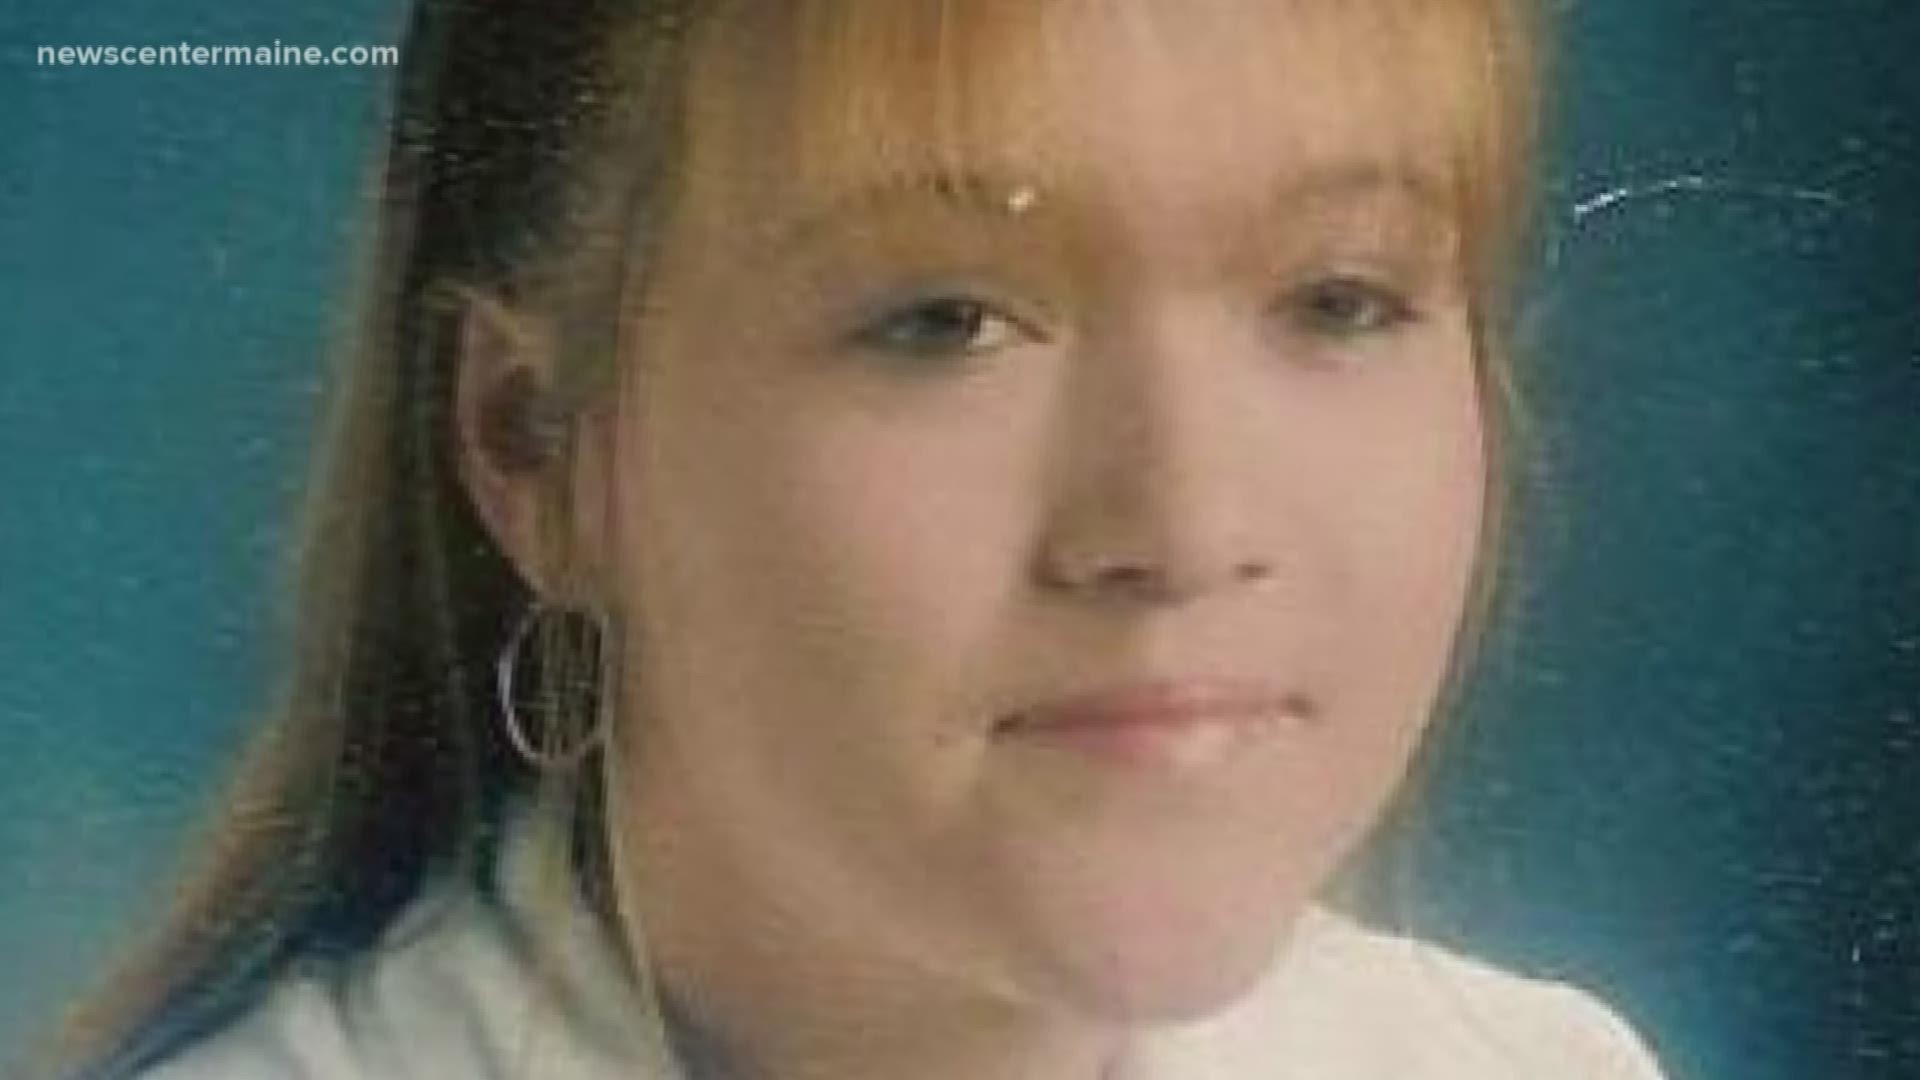 The death of teenager Ashley Ouellette in 1999 in Saco is still unsolved nearly 20 years later.